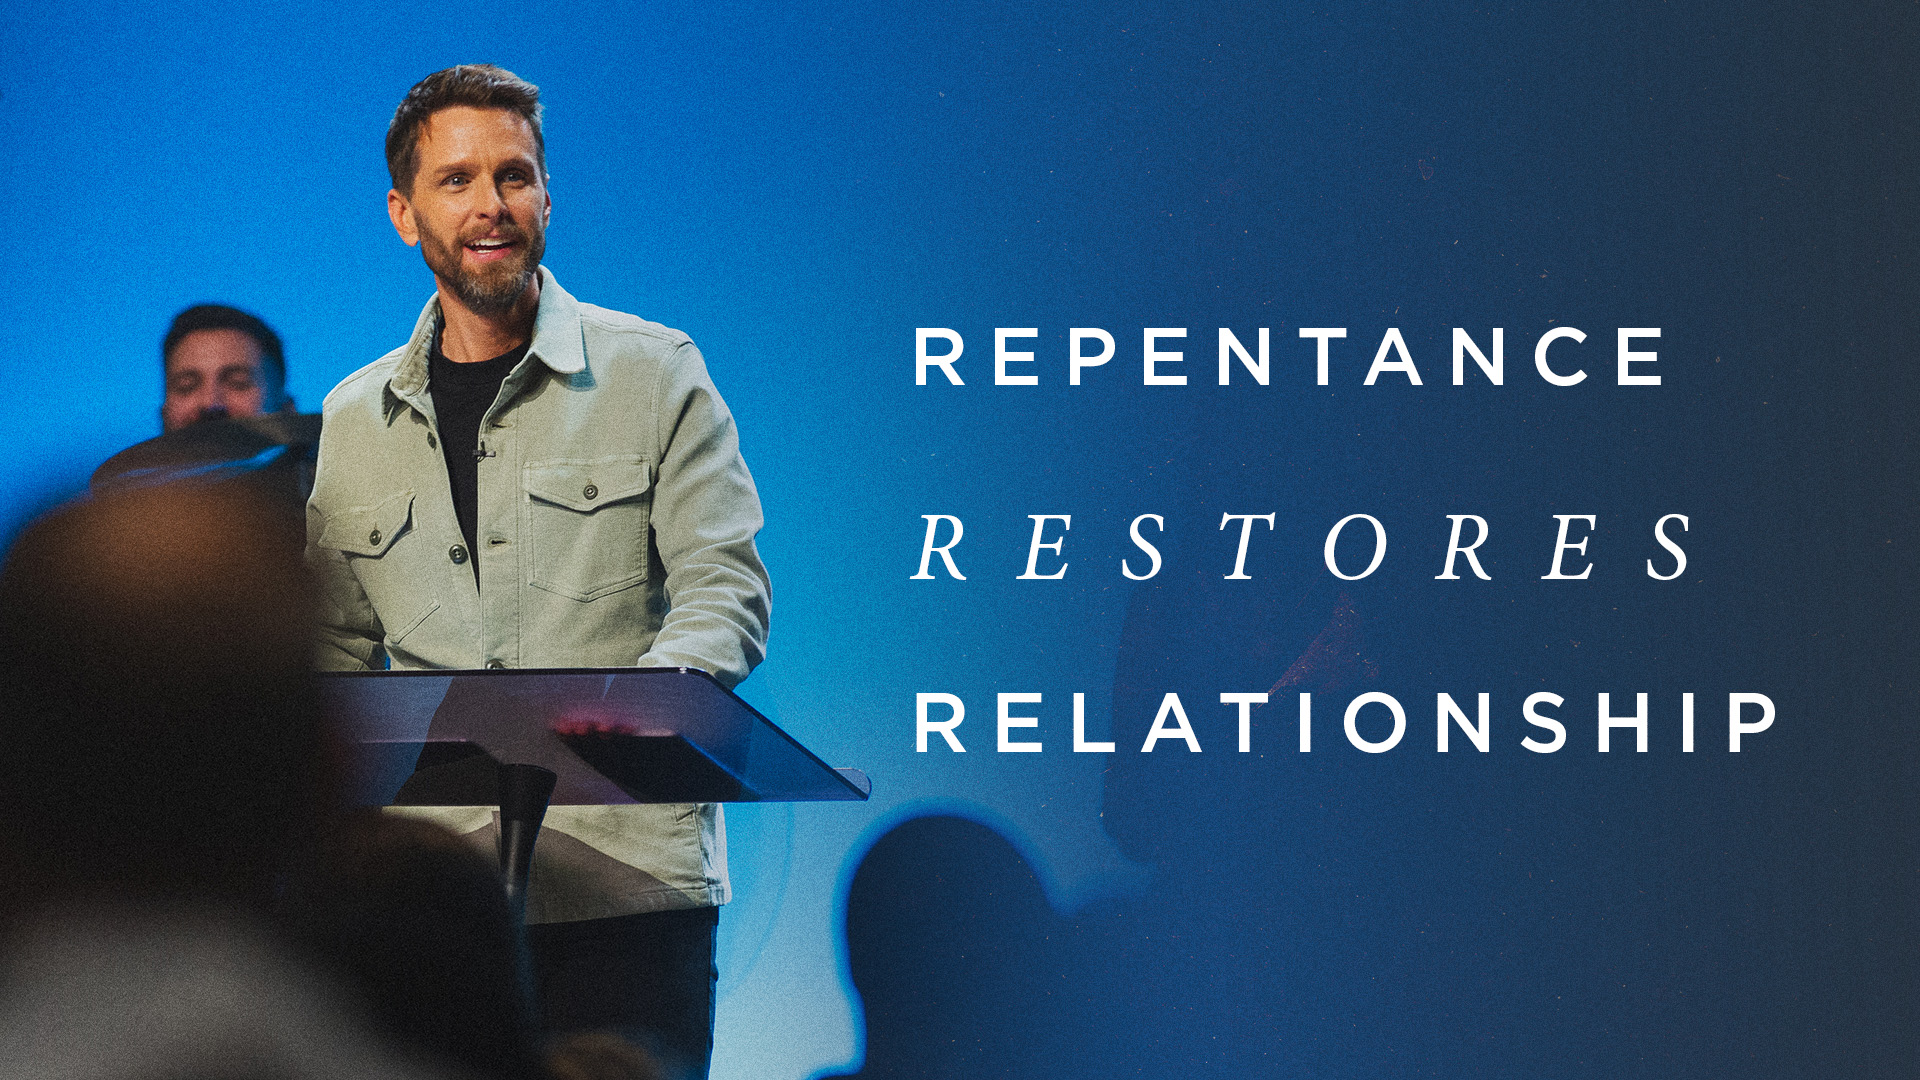 Repentance Restores Relationship - Pearsons Ministries International